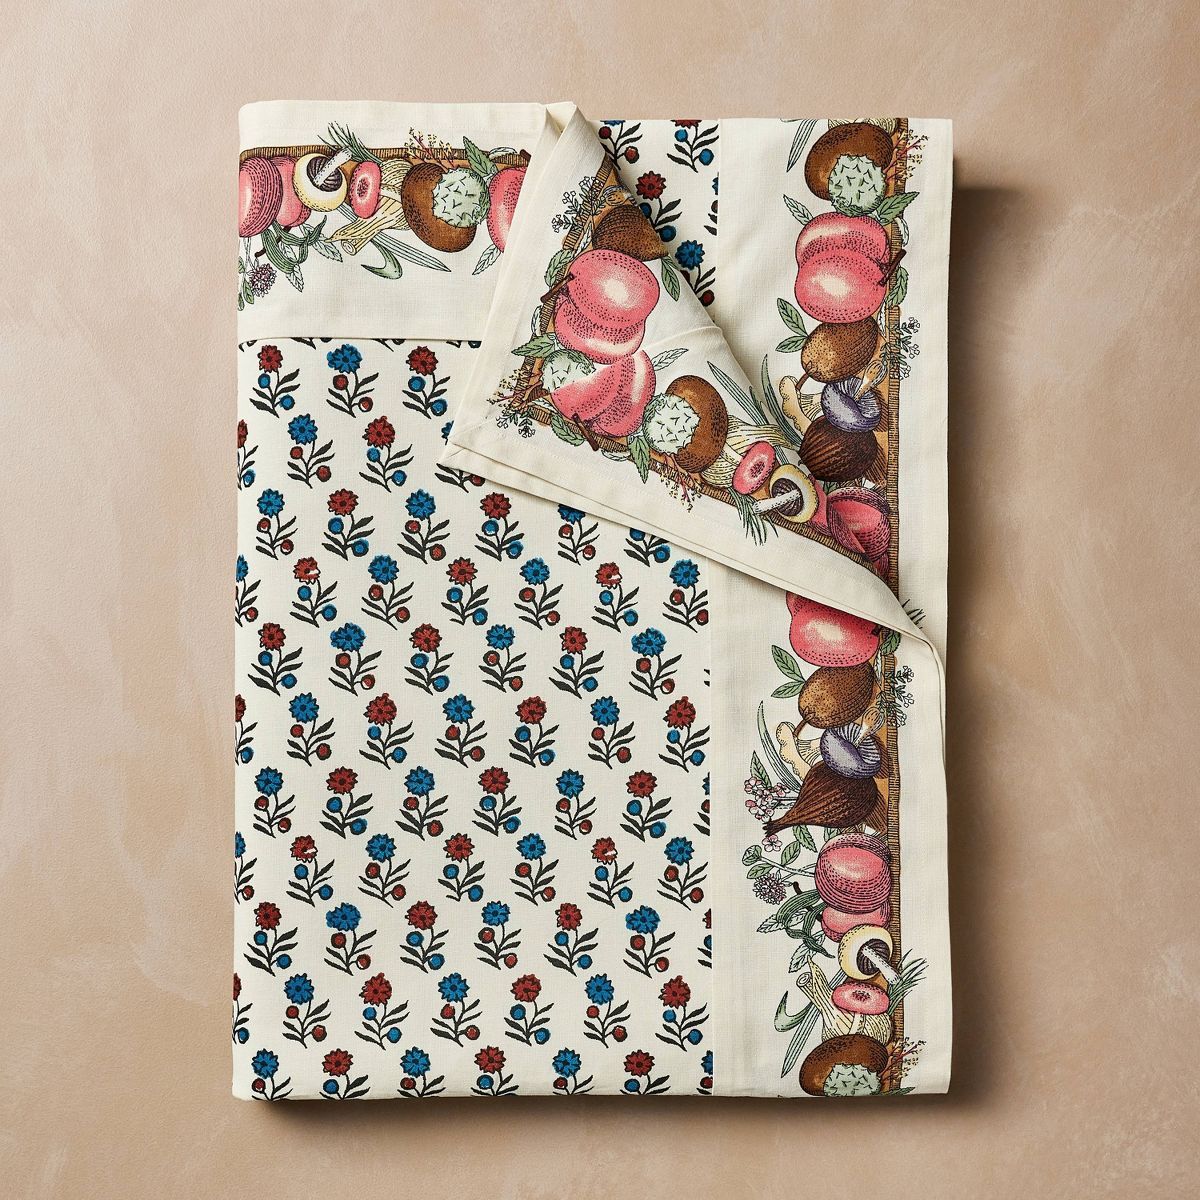 Printed Tablecloth Fall Flowers - John Derian for Target | Target